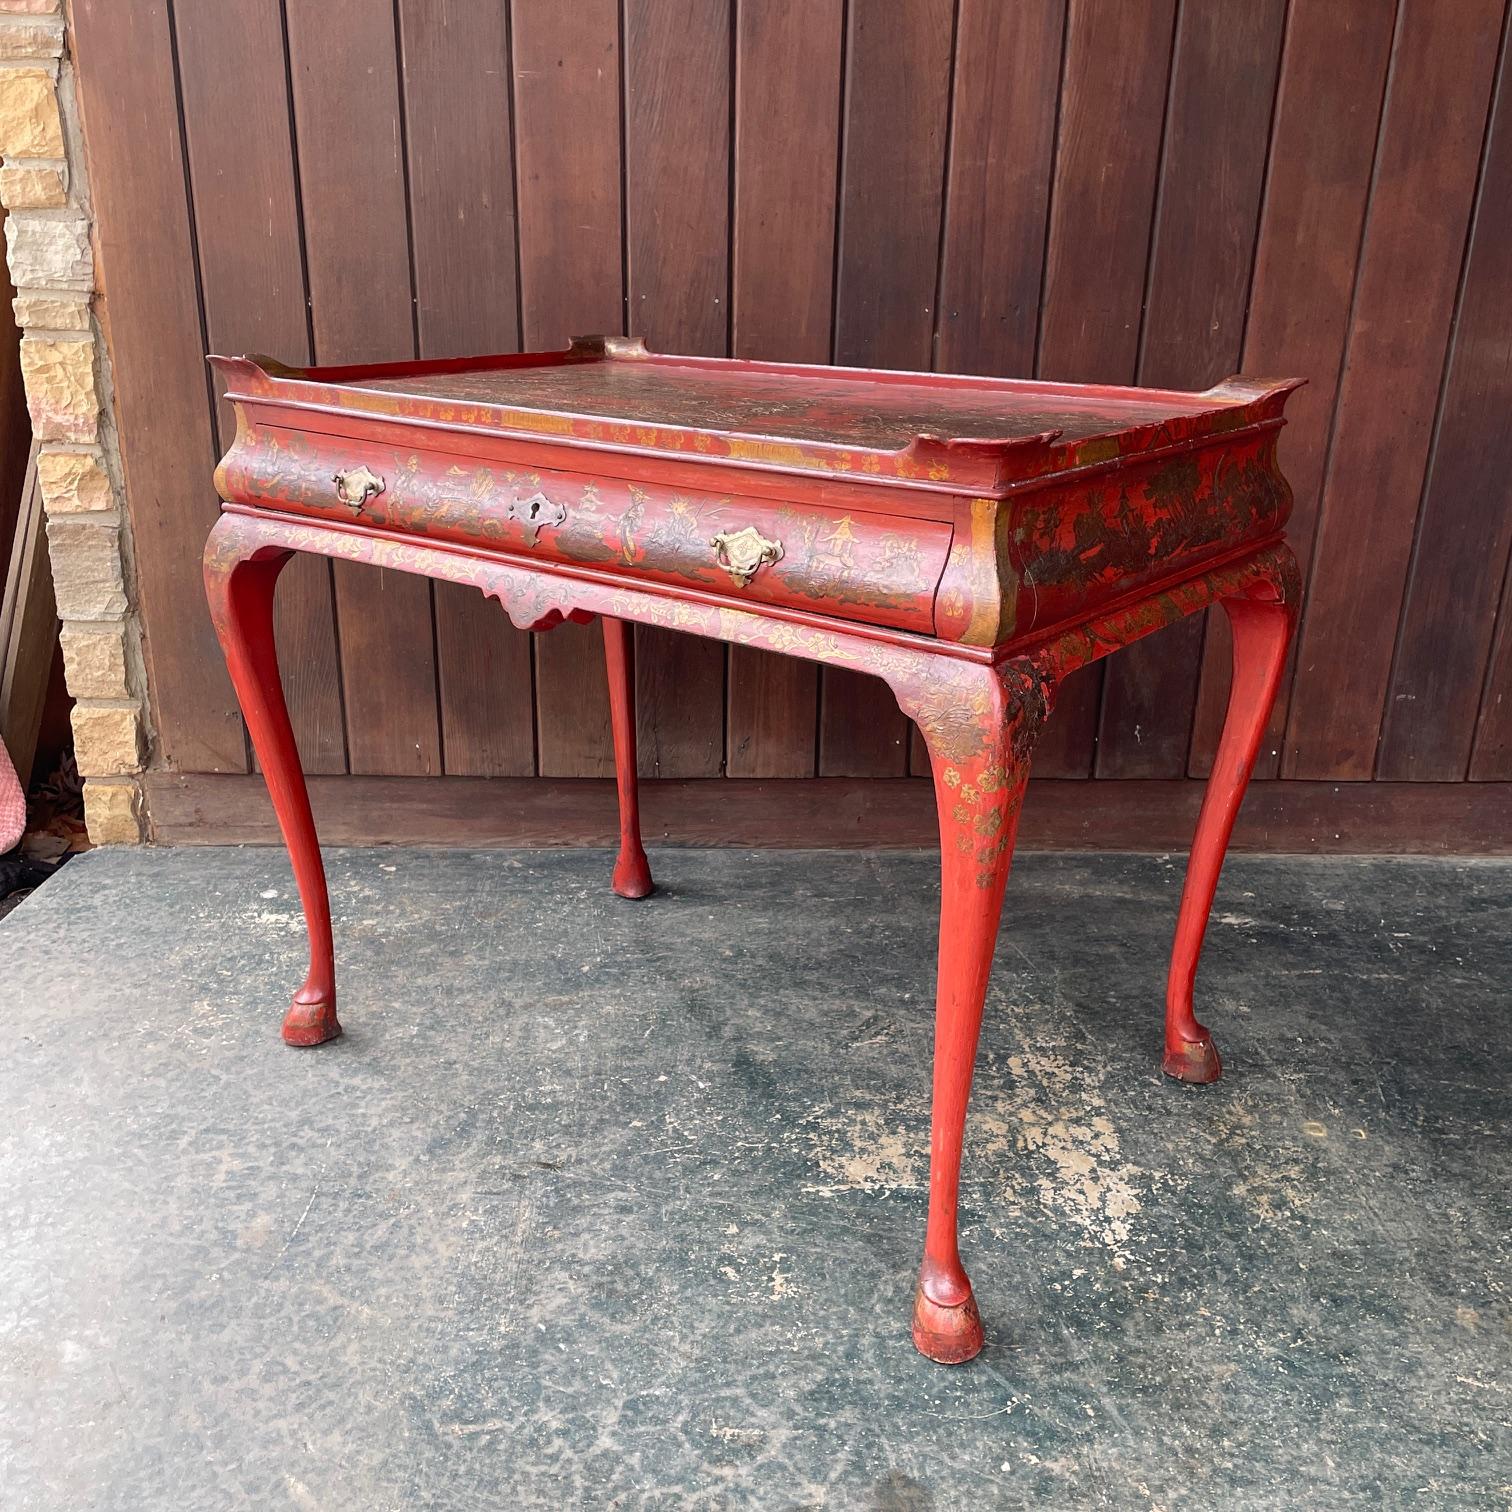 19th Century English Queen Anne Writing Desk Red Lacquered Chinoiserie Japanned In Distressed Condition For Sale In Hyattsville, MD